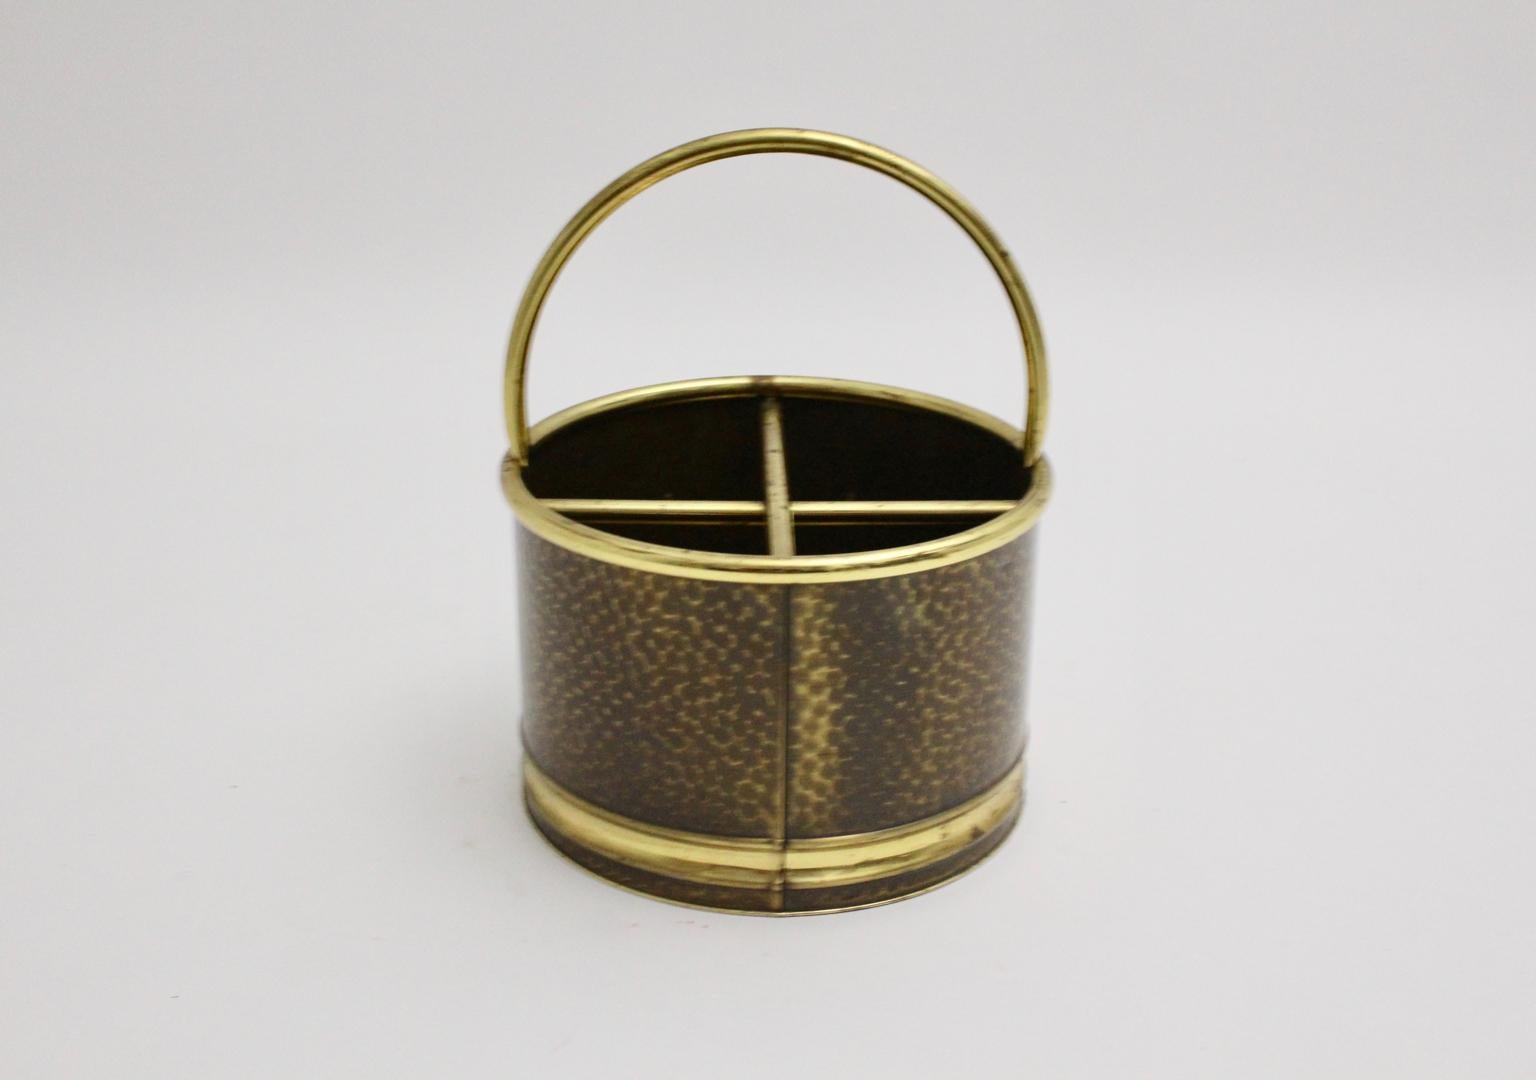 This round shaped magazine rack was made of hammered brass. Inside are four compartments and also at the top it features a handle.
The magazine rack shows a sign 